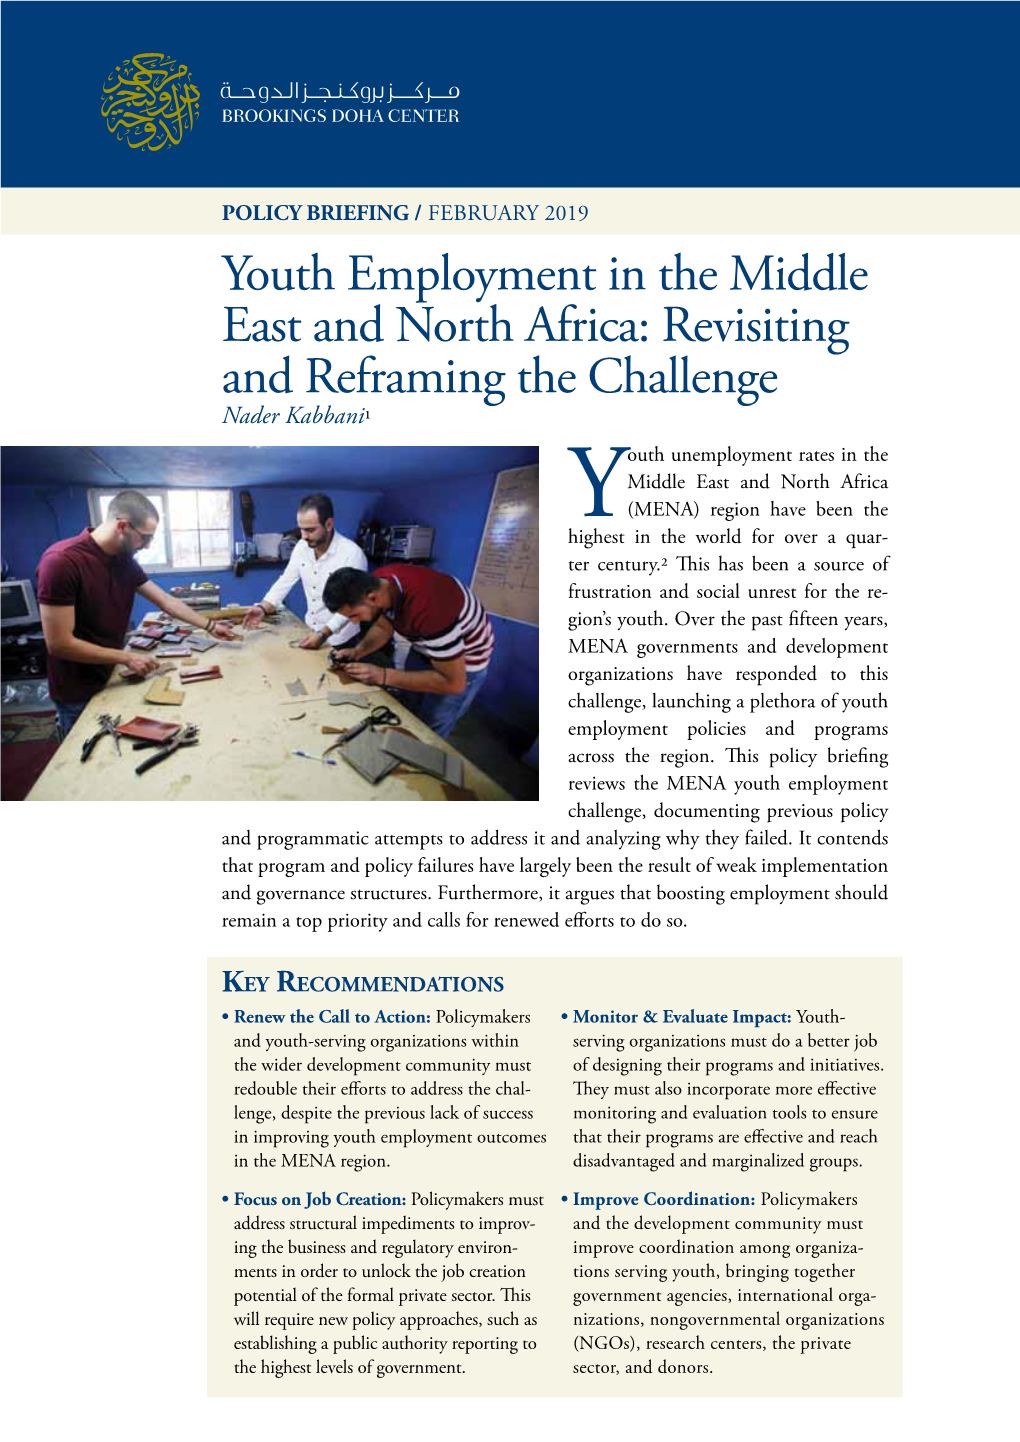 Youth Employment in the Middle East and North Africa